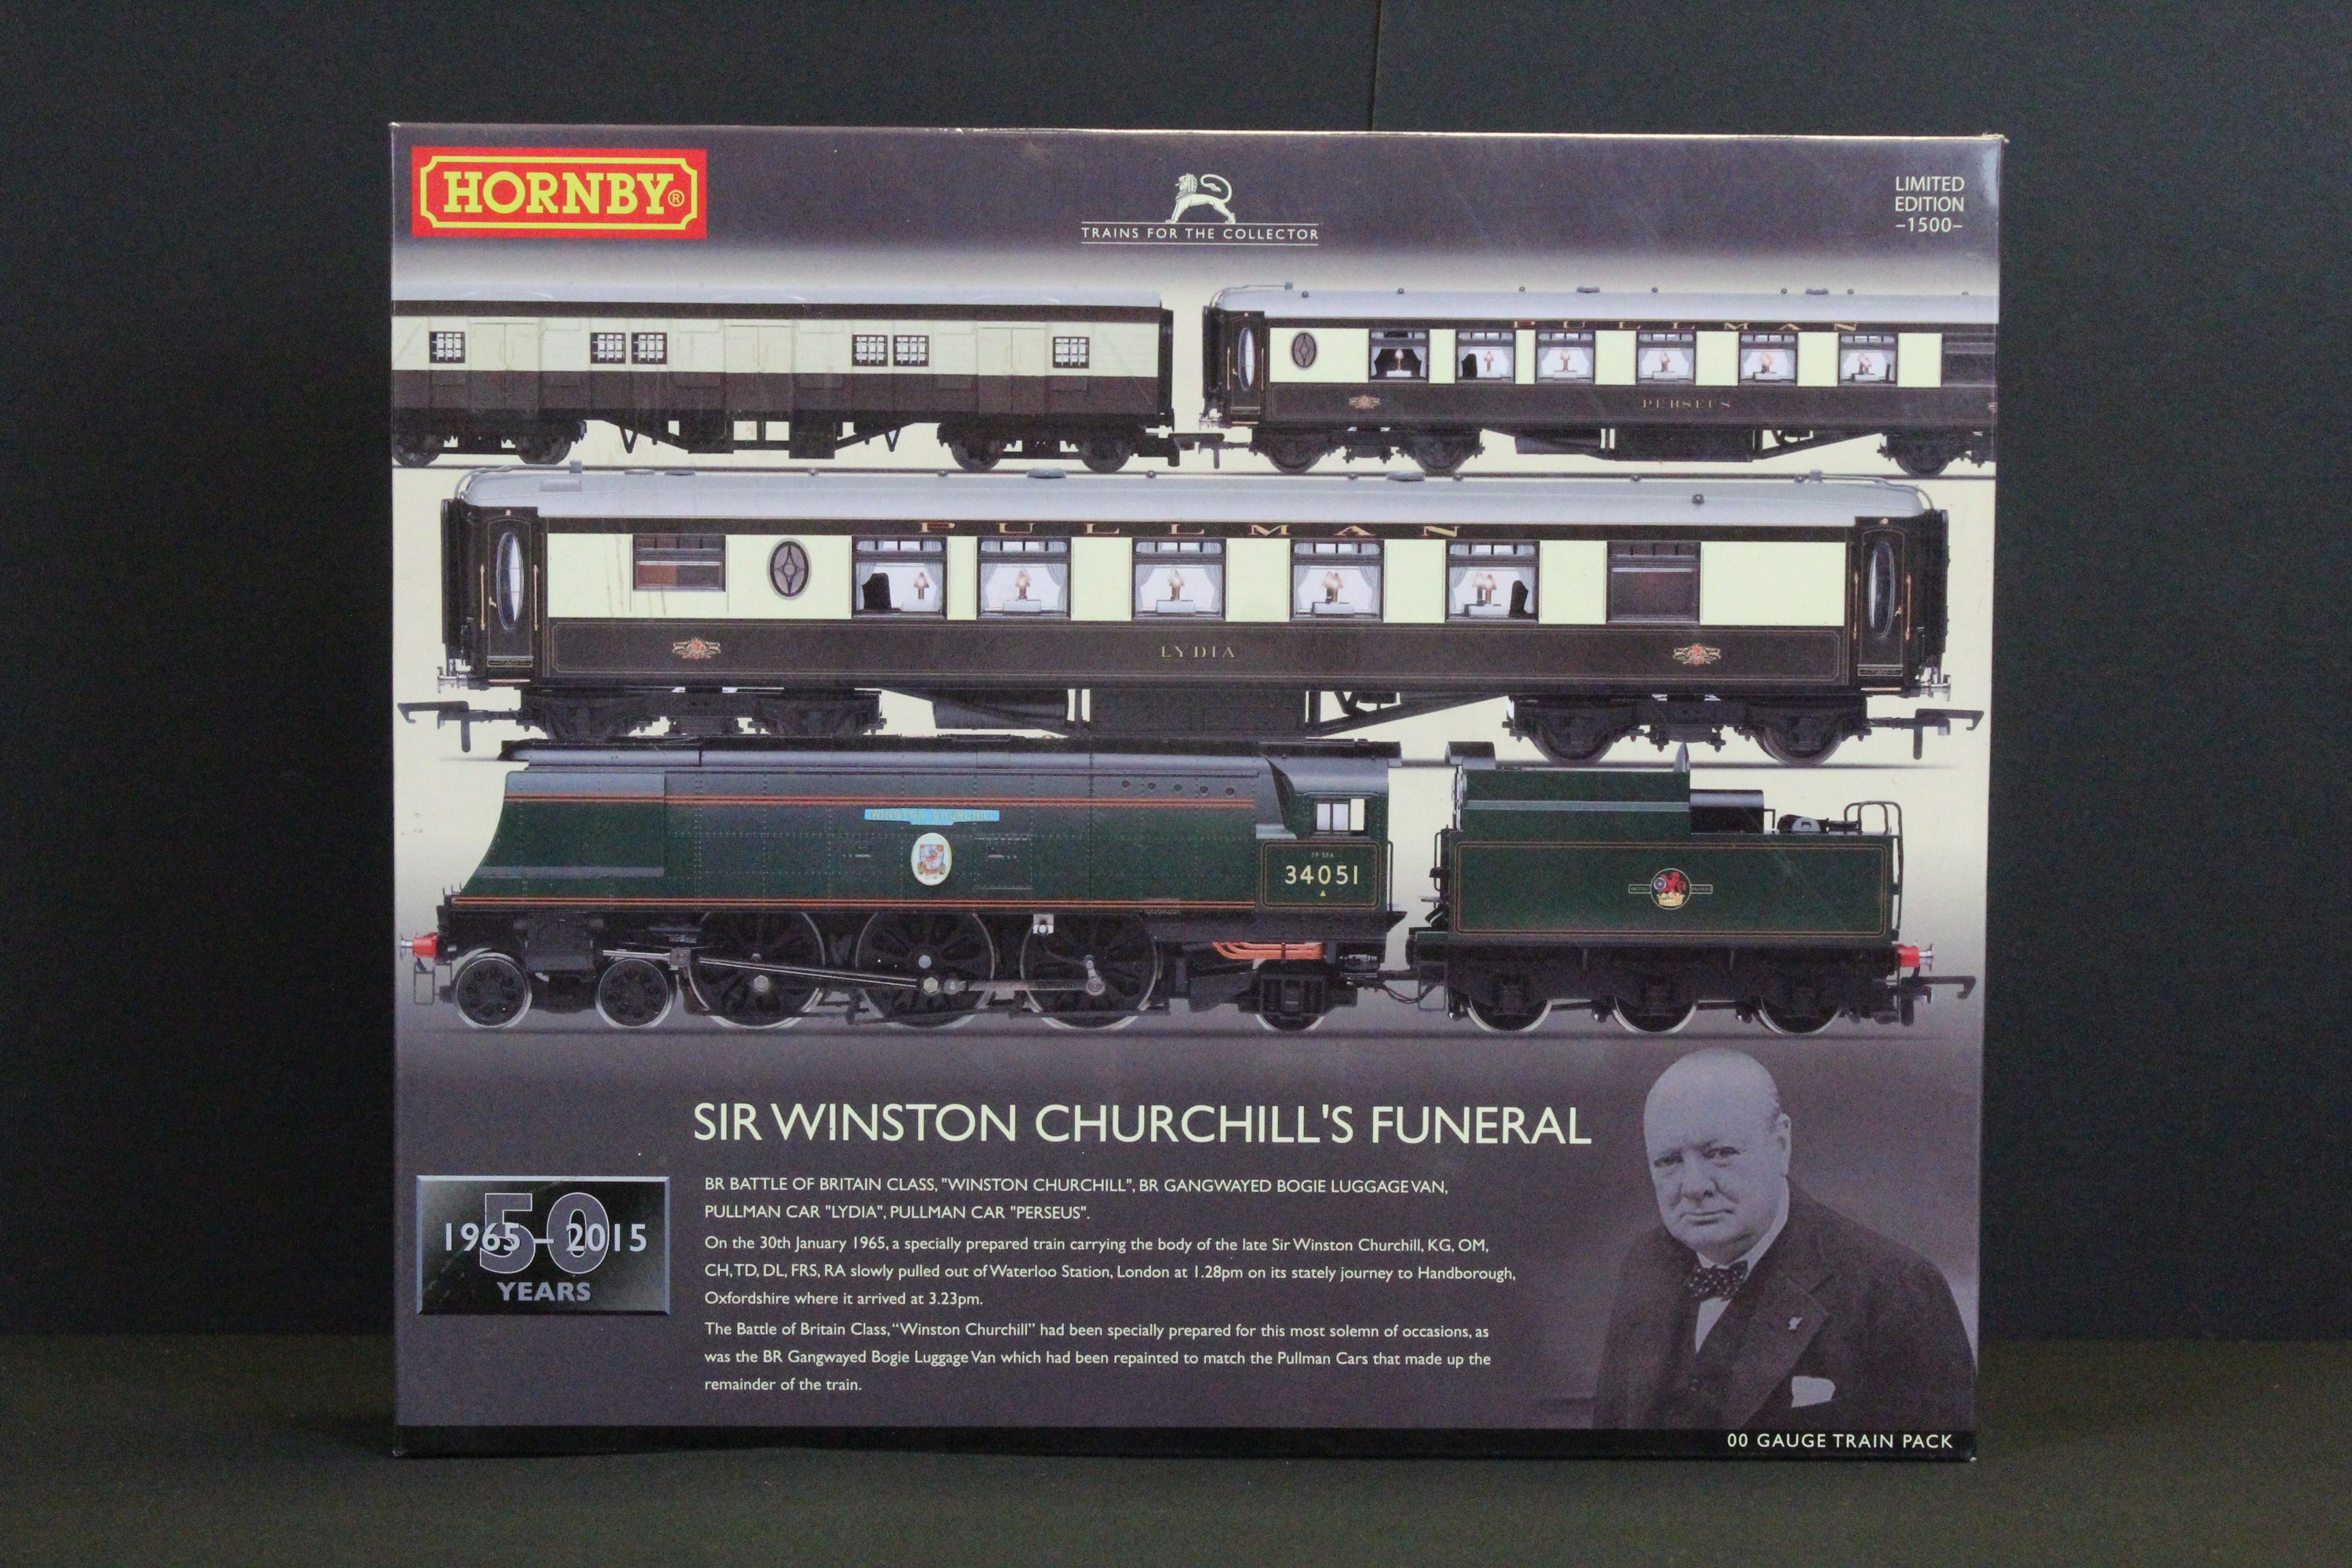 Boxed ltd edn Hornby R3300 Sir Winston Churchill's Funeral Train Pack, completye with certificate